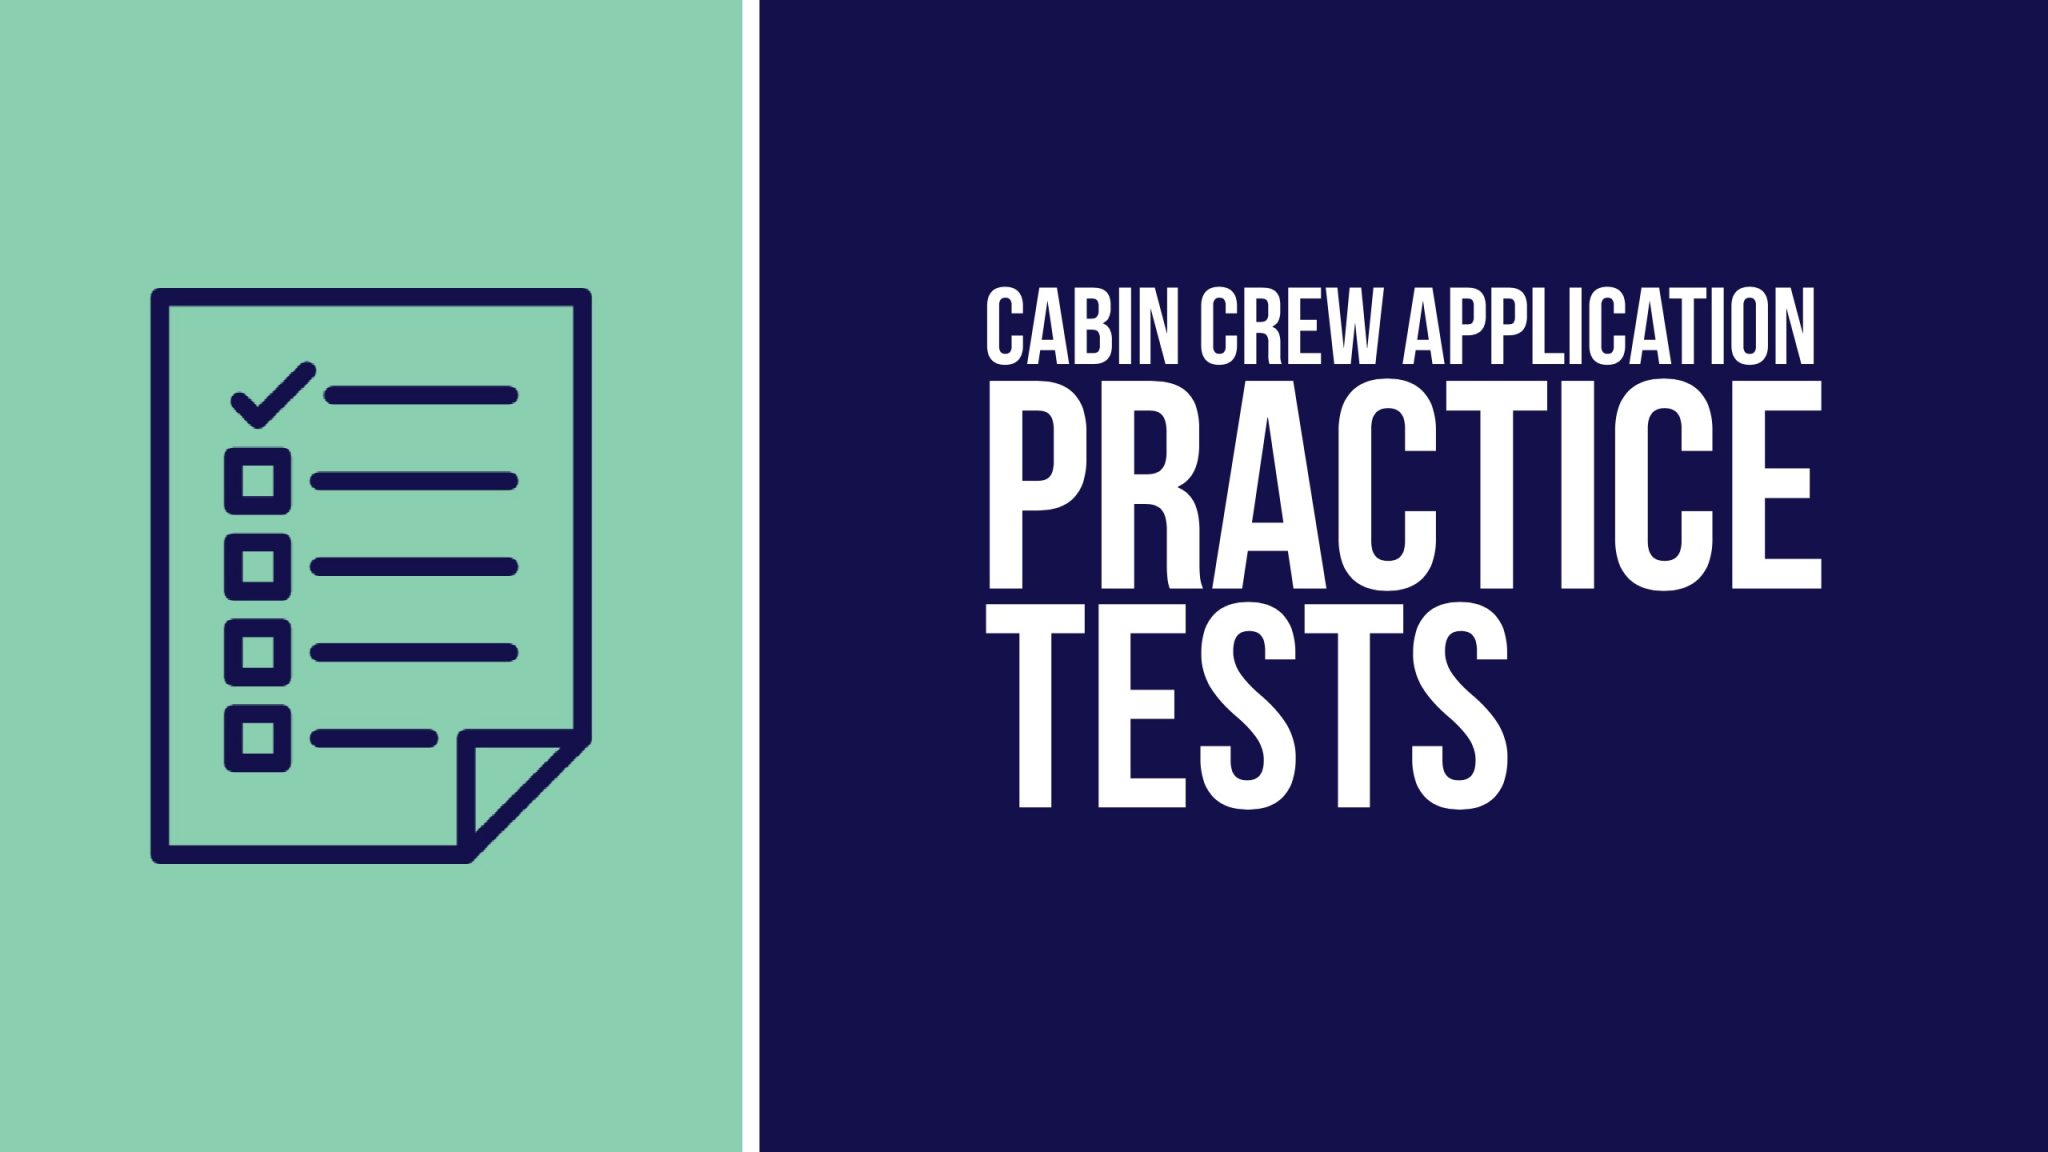 practice-tests-for-the-most-popular-cabin-crew-entrance-exams-used-by-international-airlines